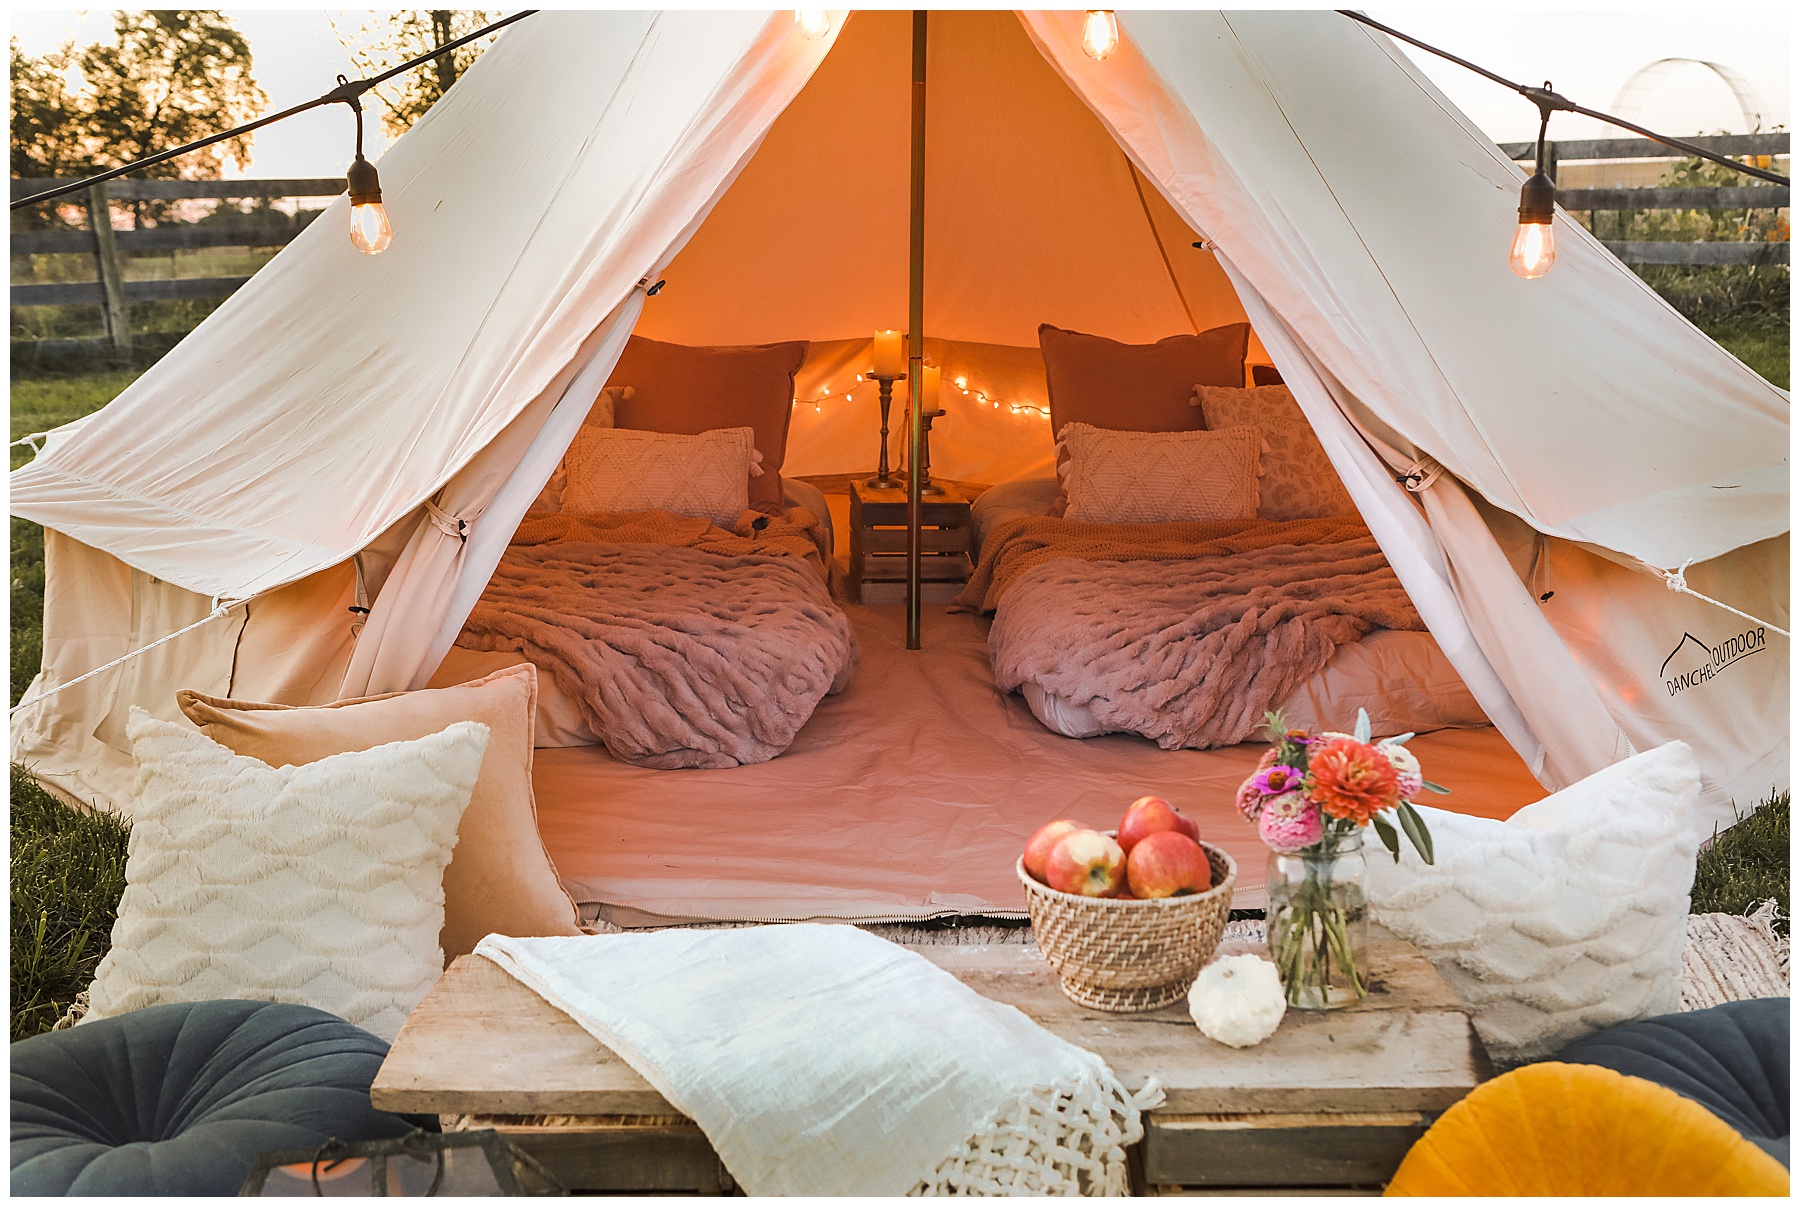  Ideas for glamping